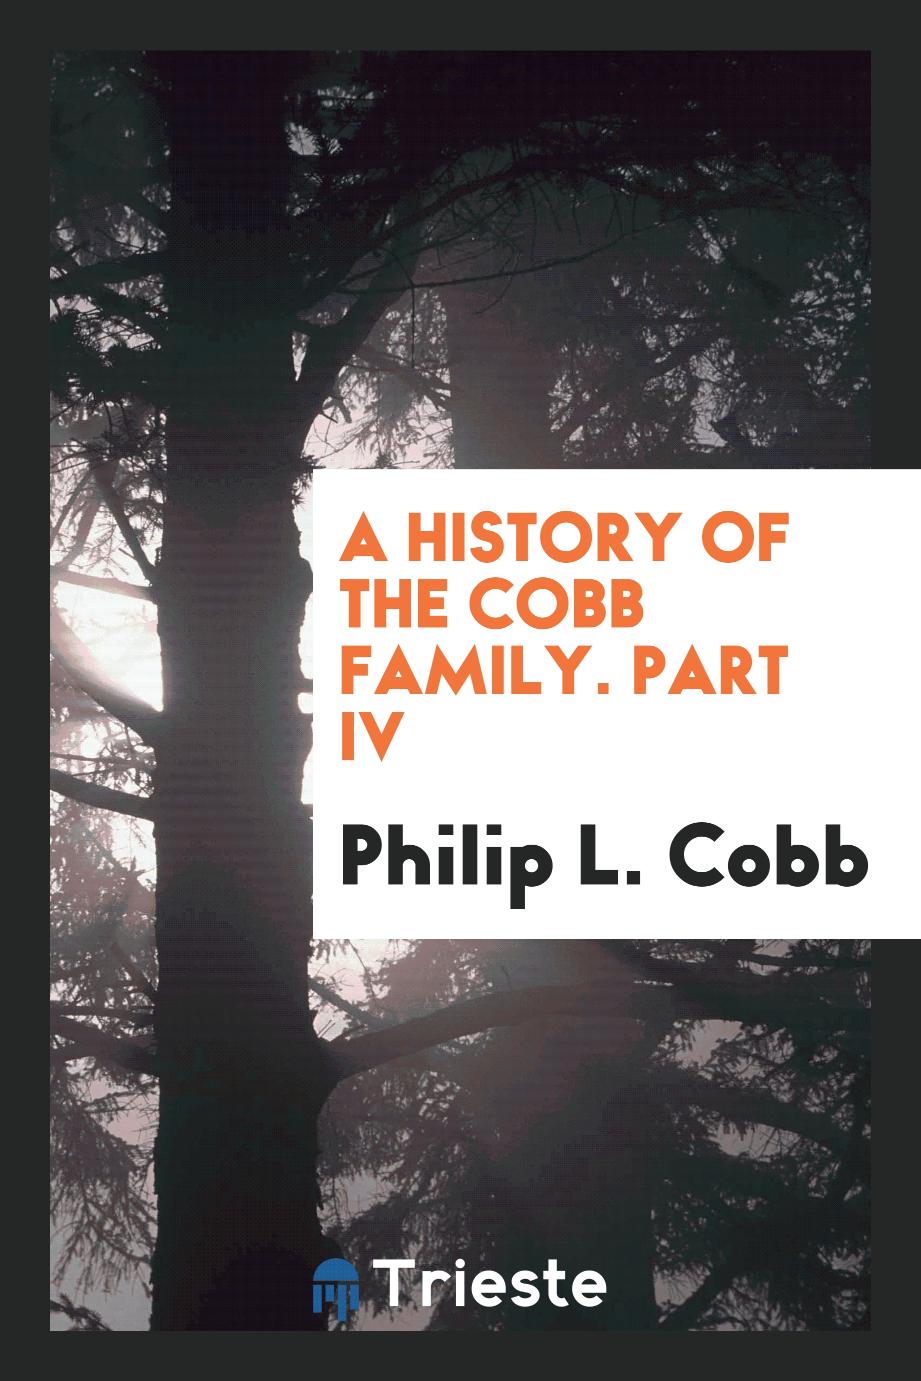 A history of the Cobb family. Part IV